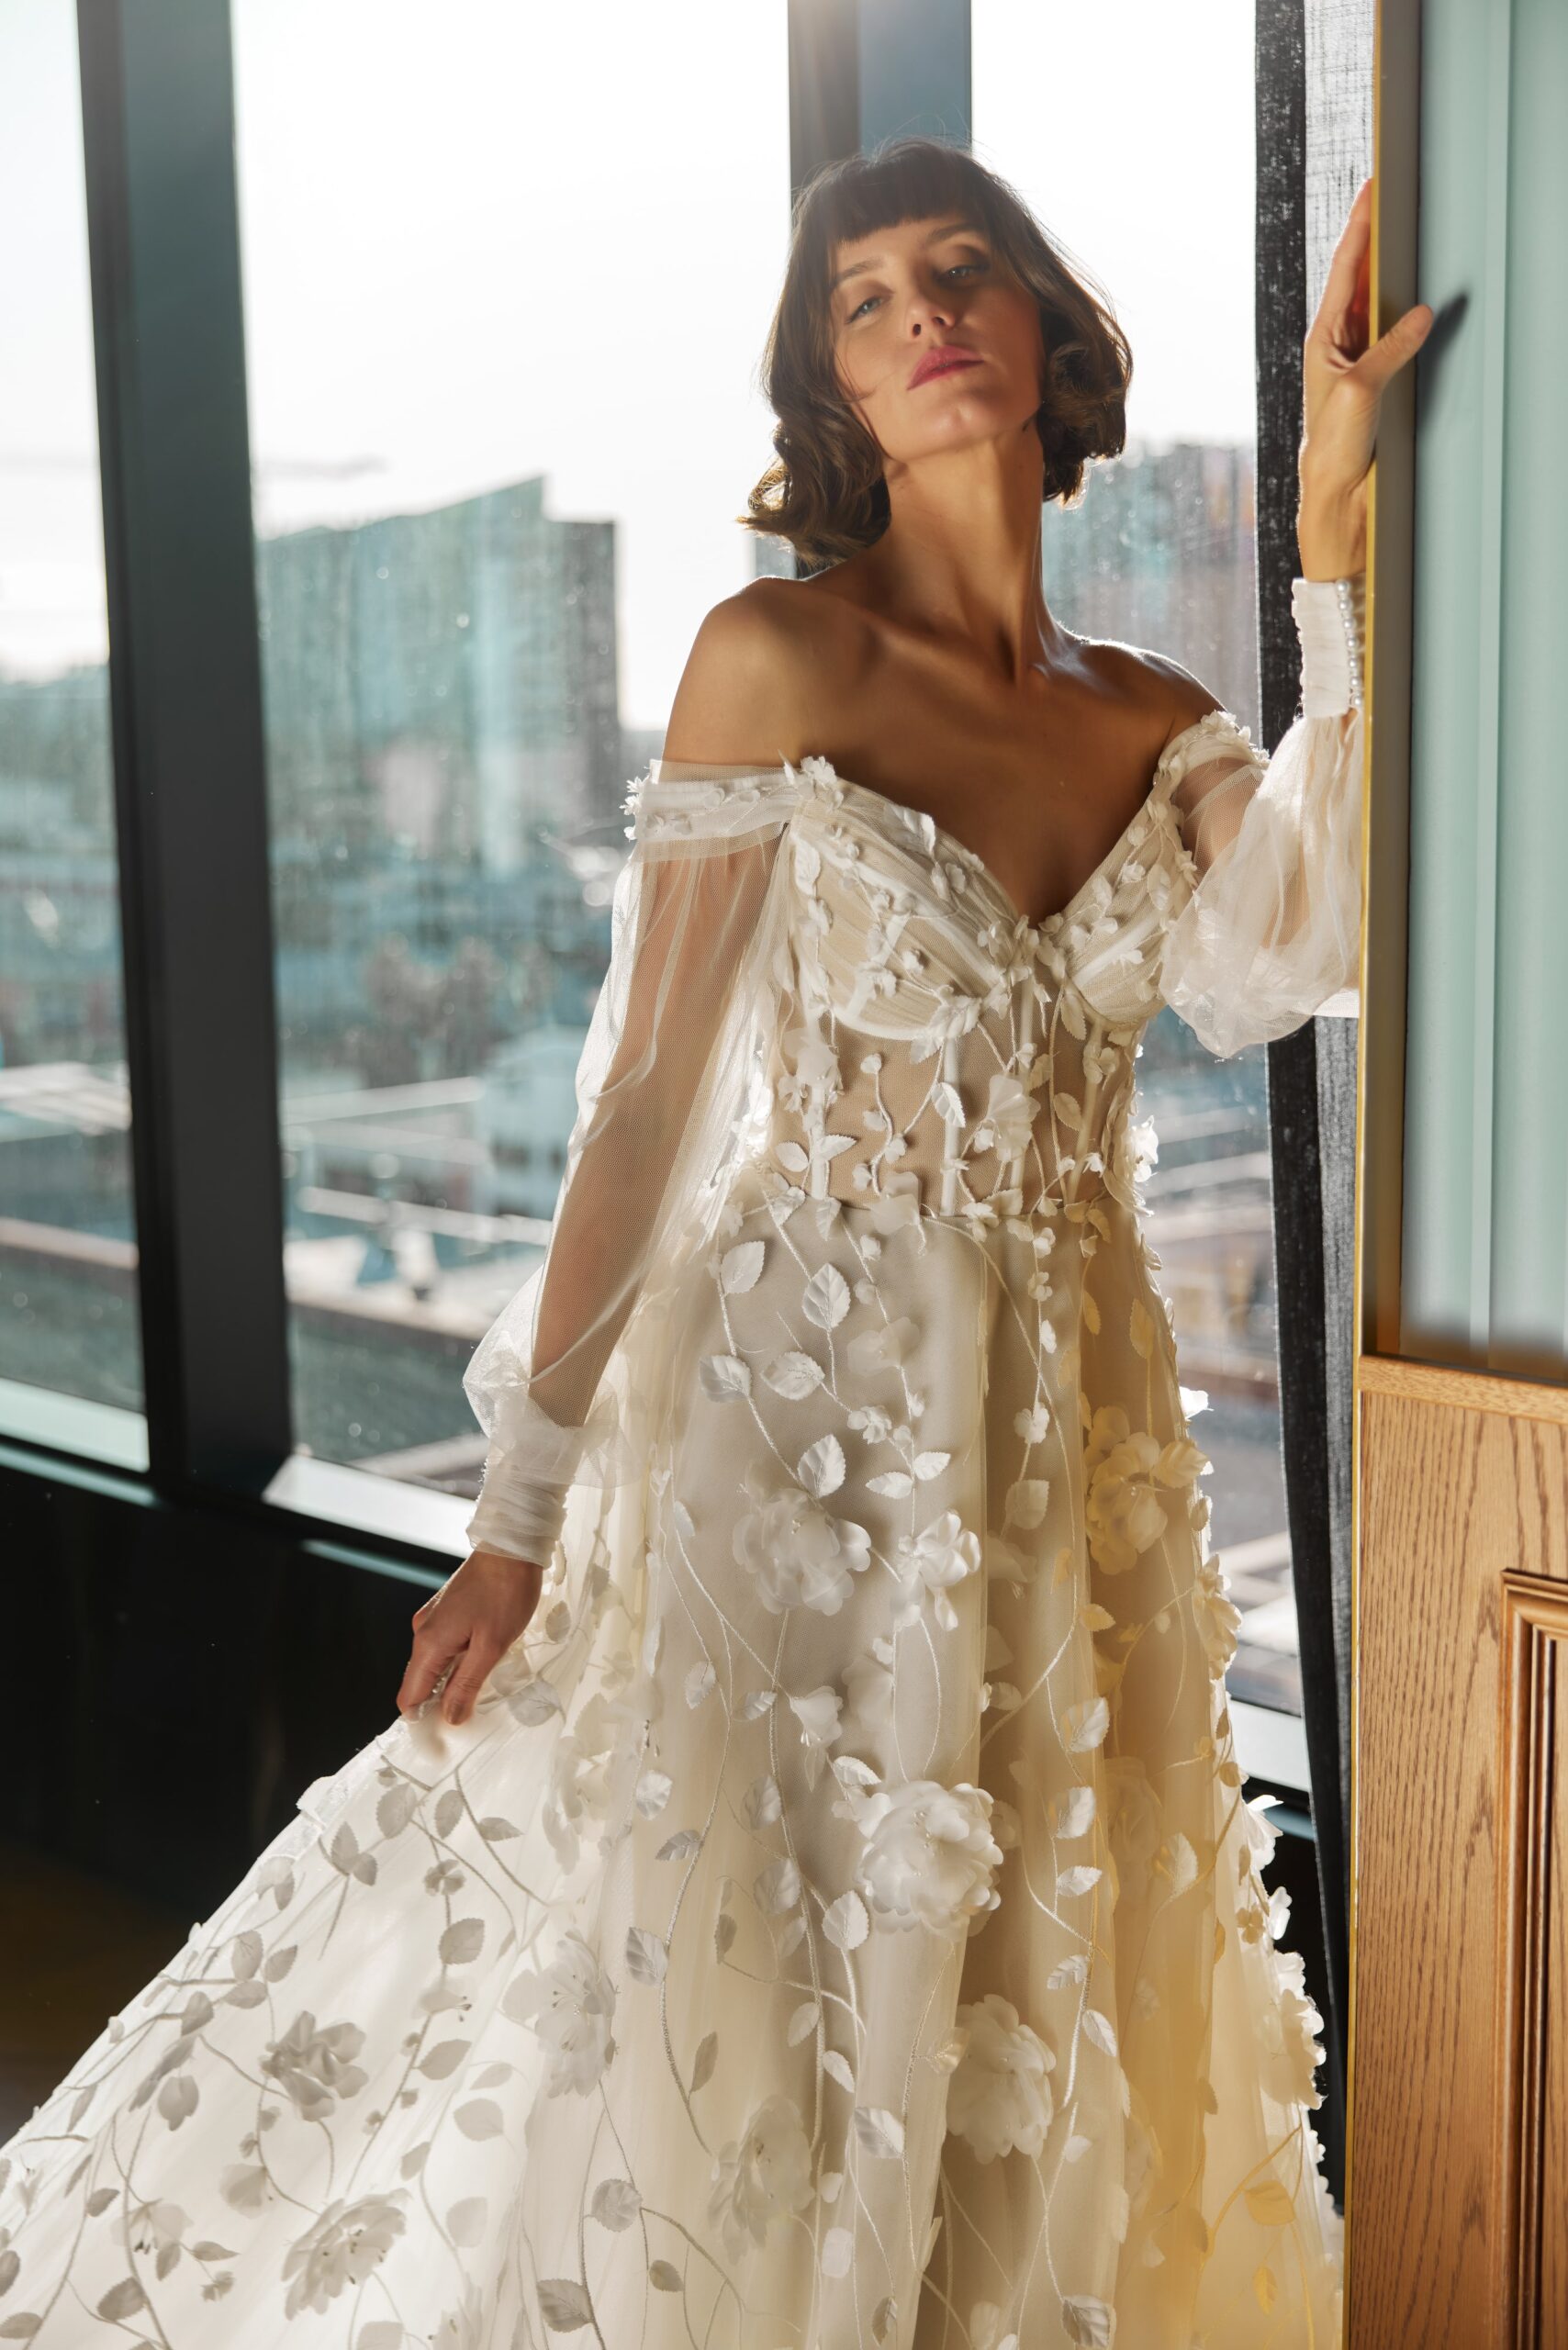 Florentine - a 3D floral lace gown with a sheer corset bodice, soft tulle off-the-shoulder sleeves and full skirt.